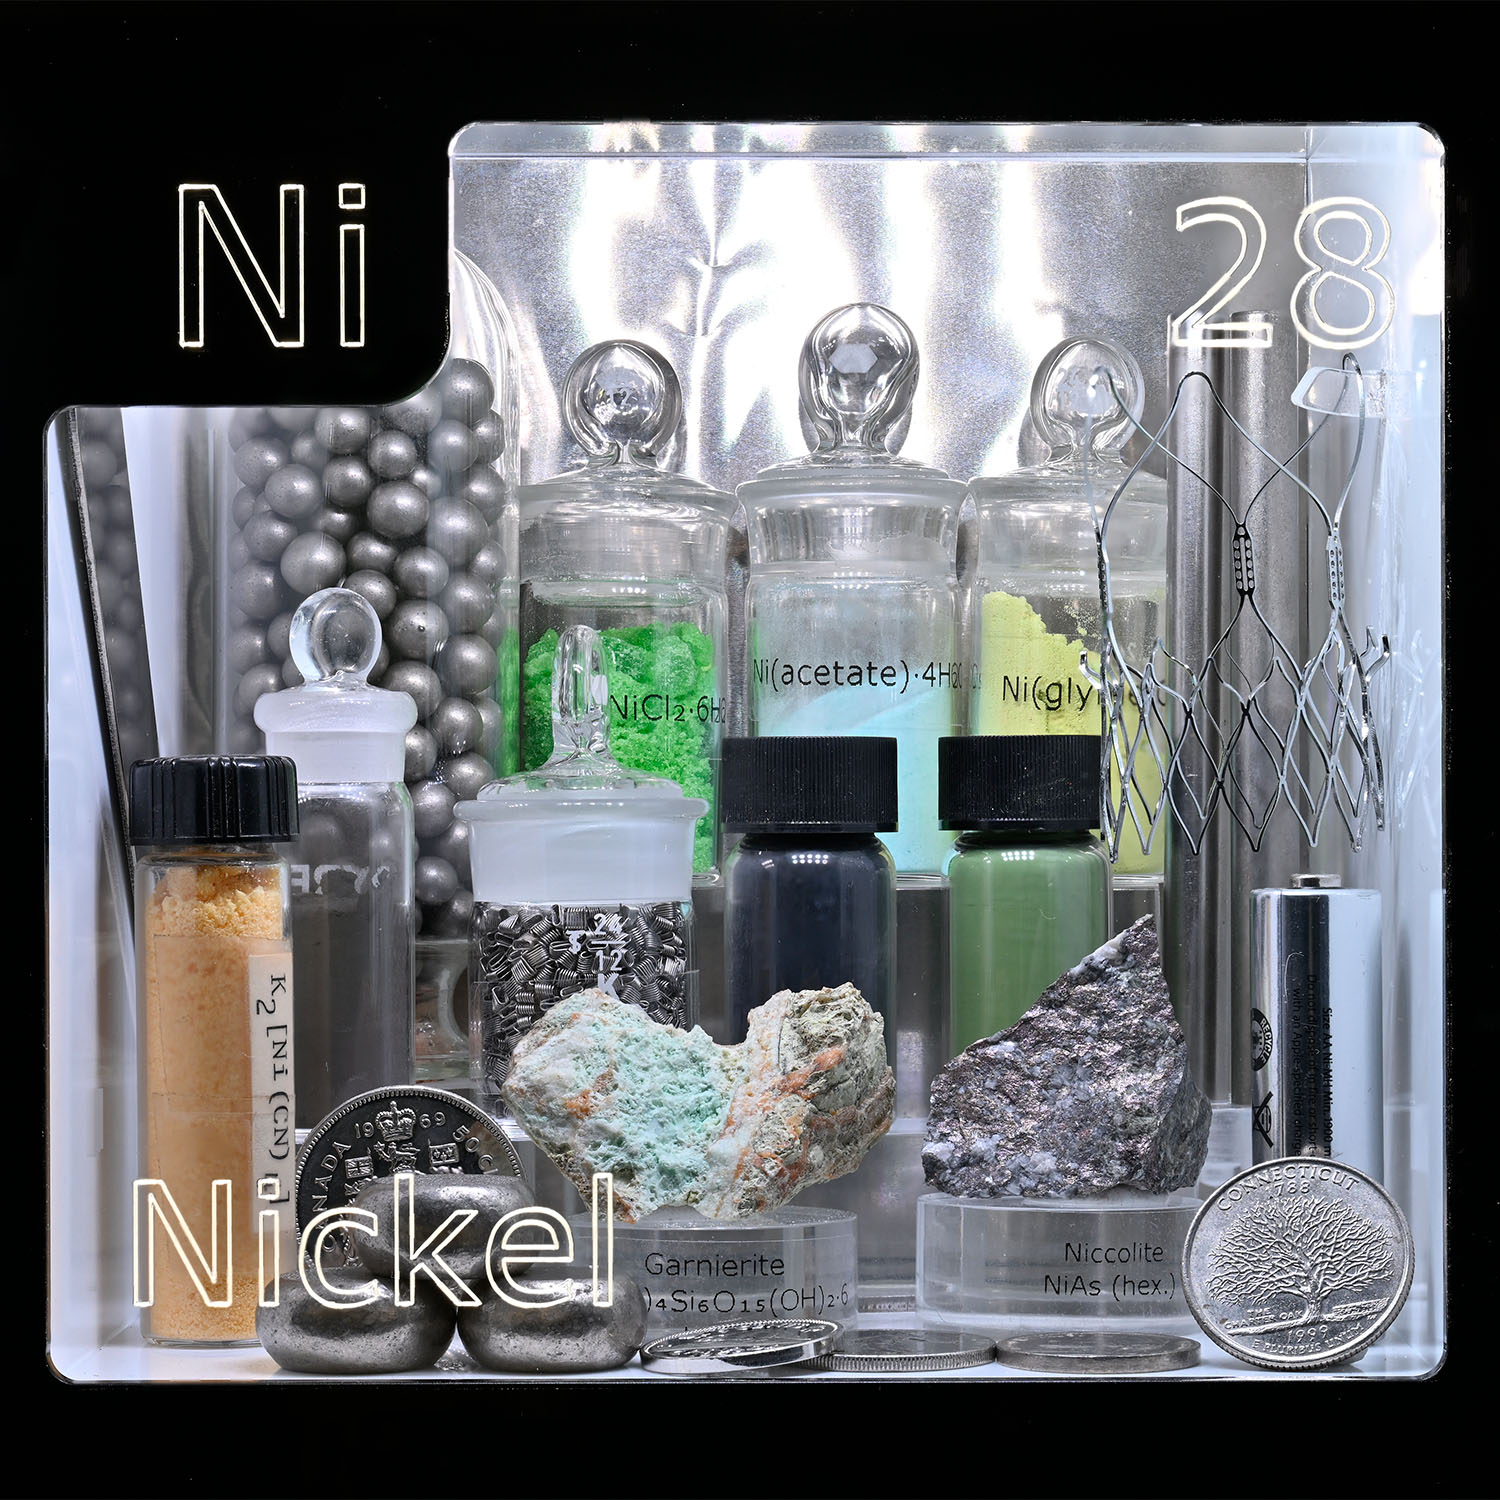 Periodic Table Display - close up of Nickel and the items that contain that element